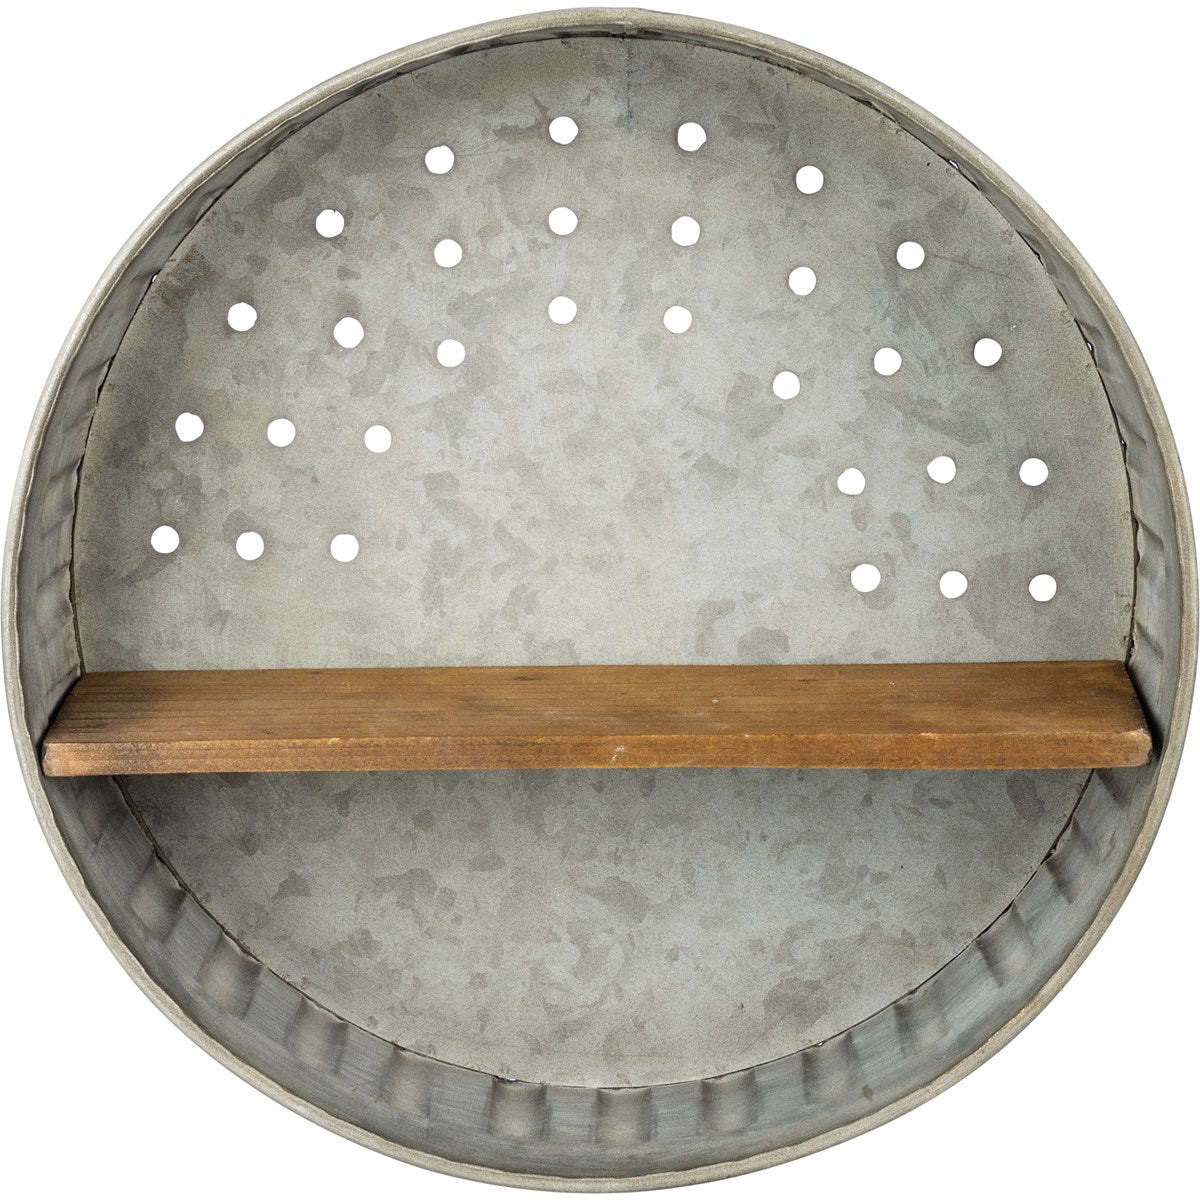 Surprise Me Sale 🤭 Rustic Round Wall Shelf 12" Galvanized Metal and Wood